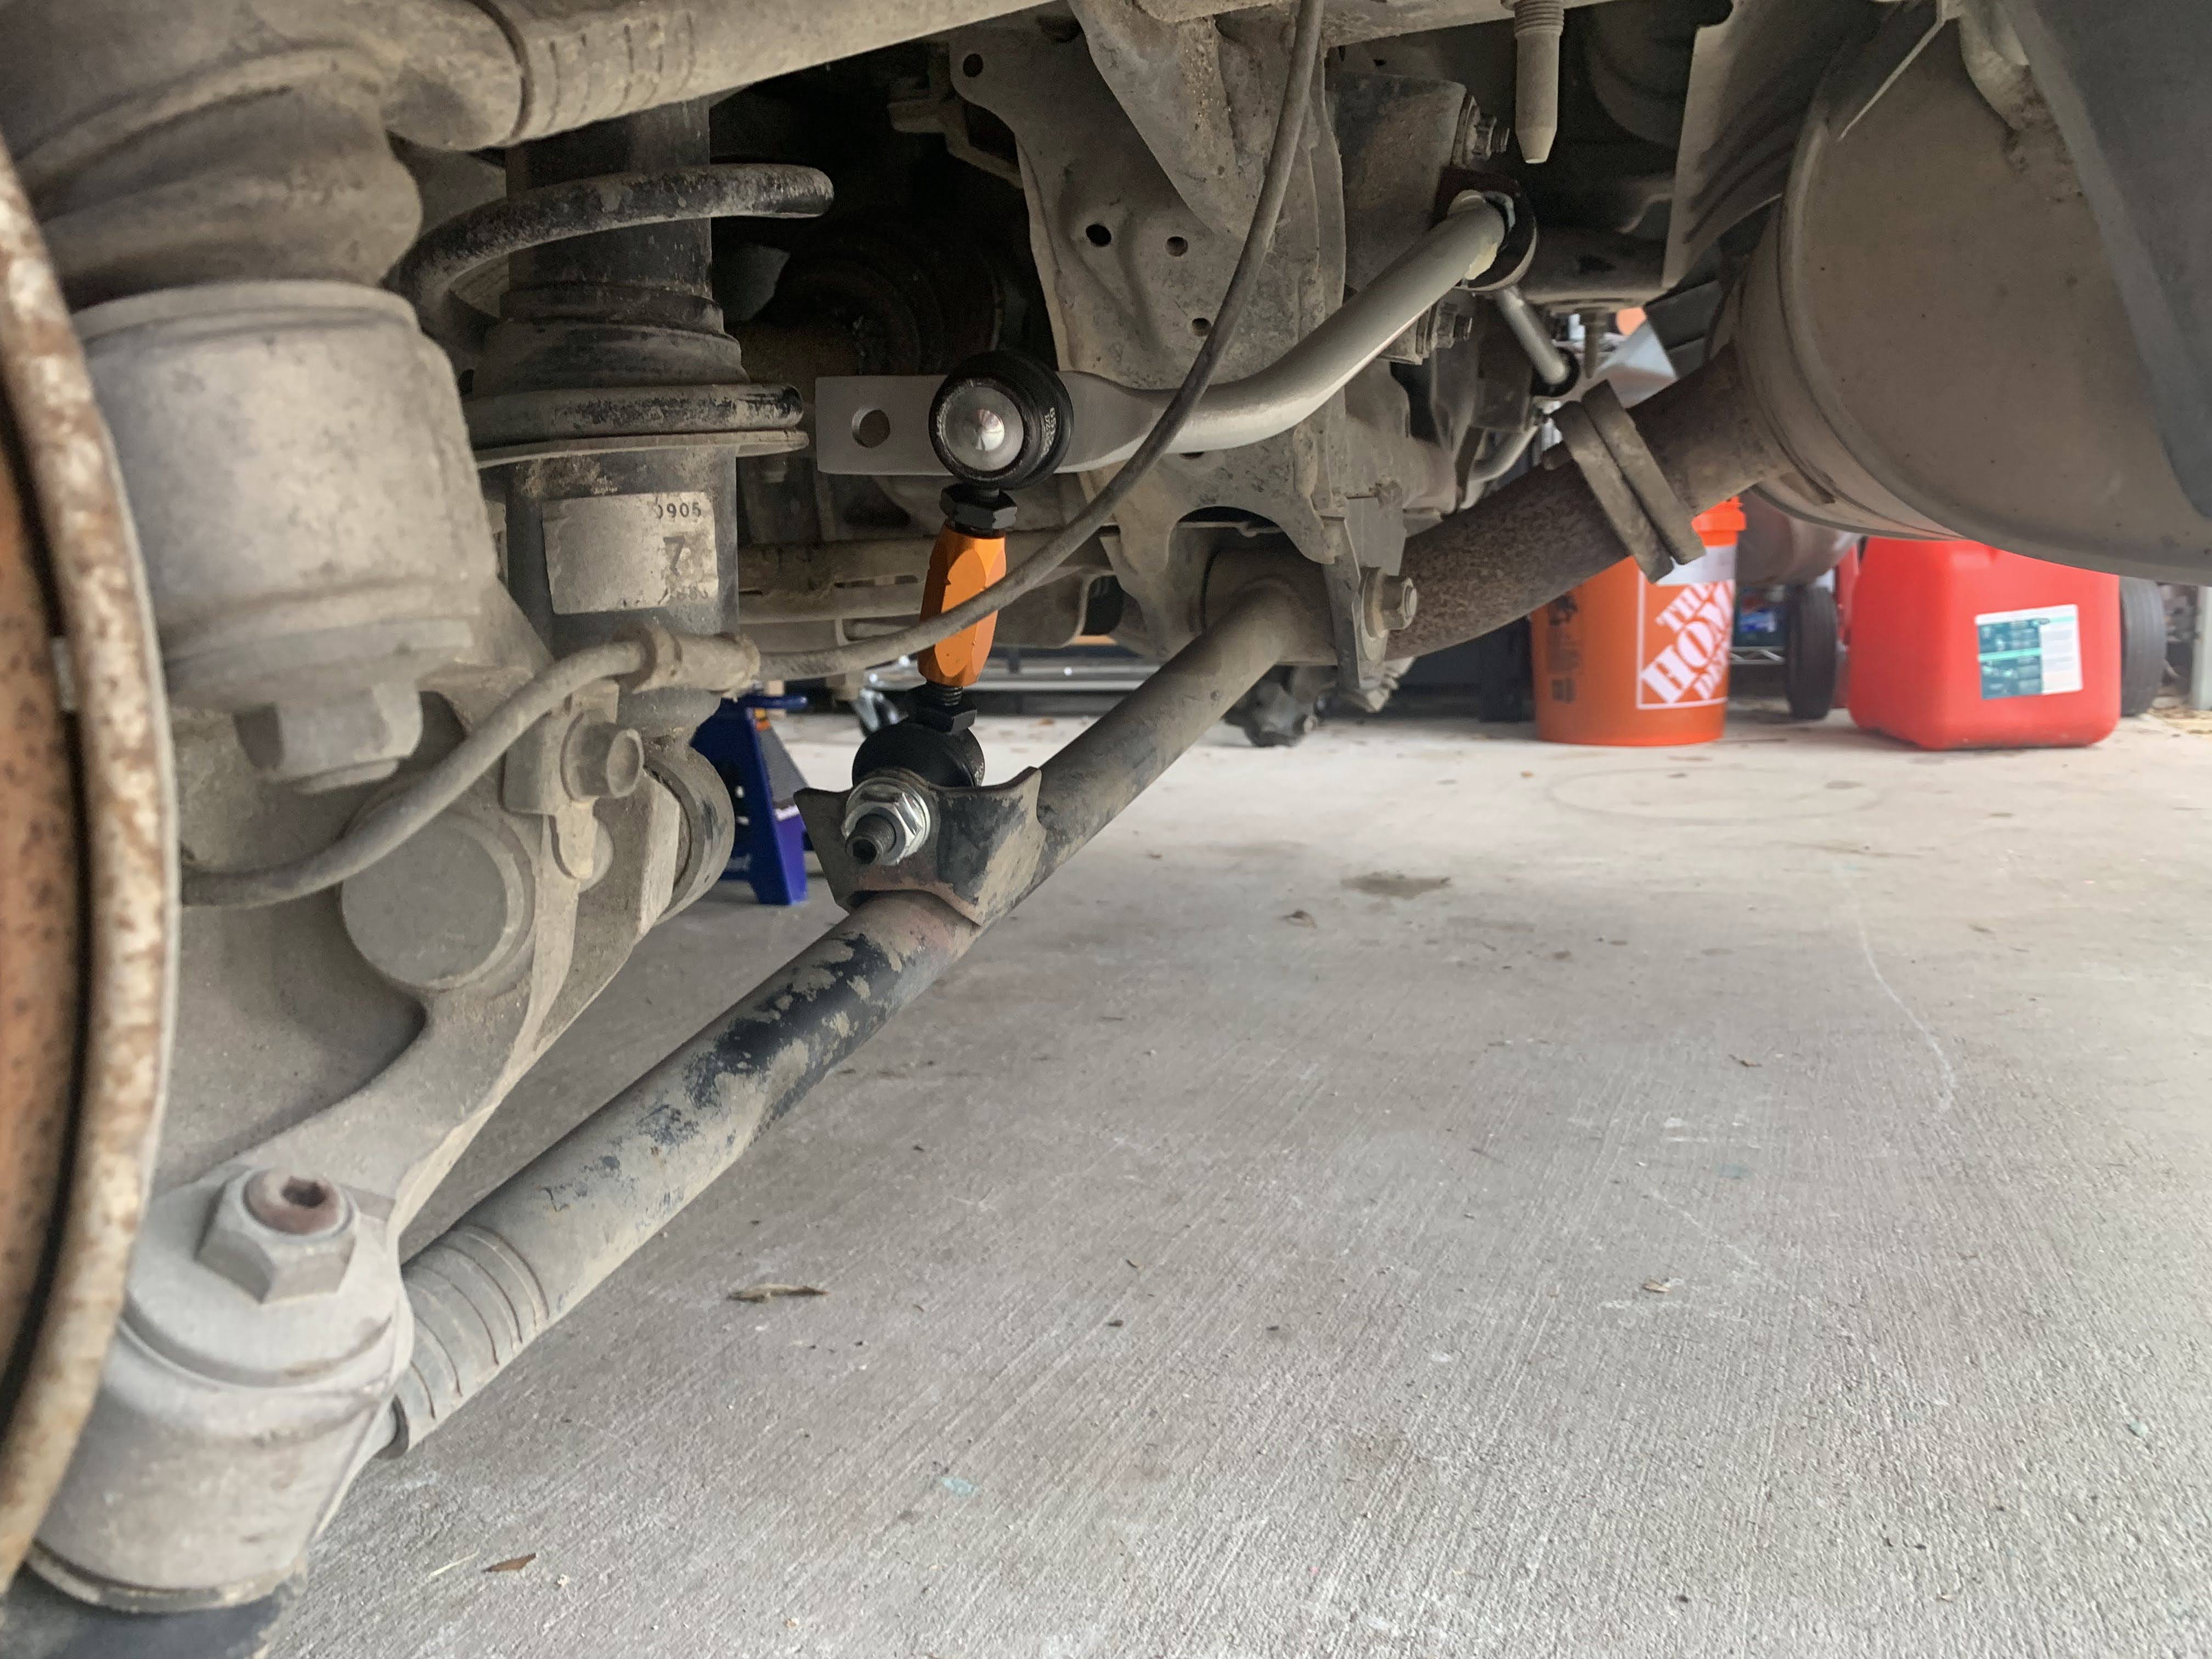 The new sway bar installed.